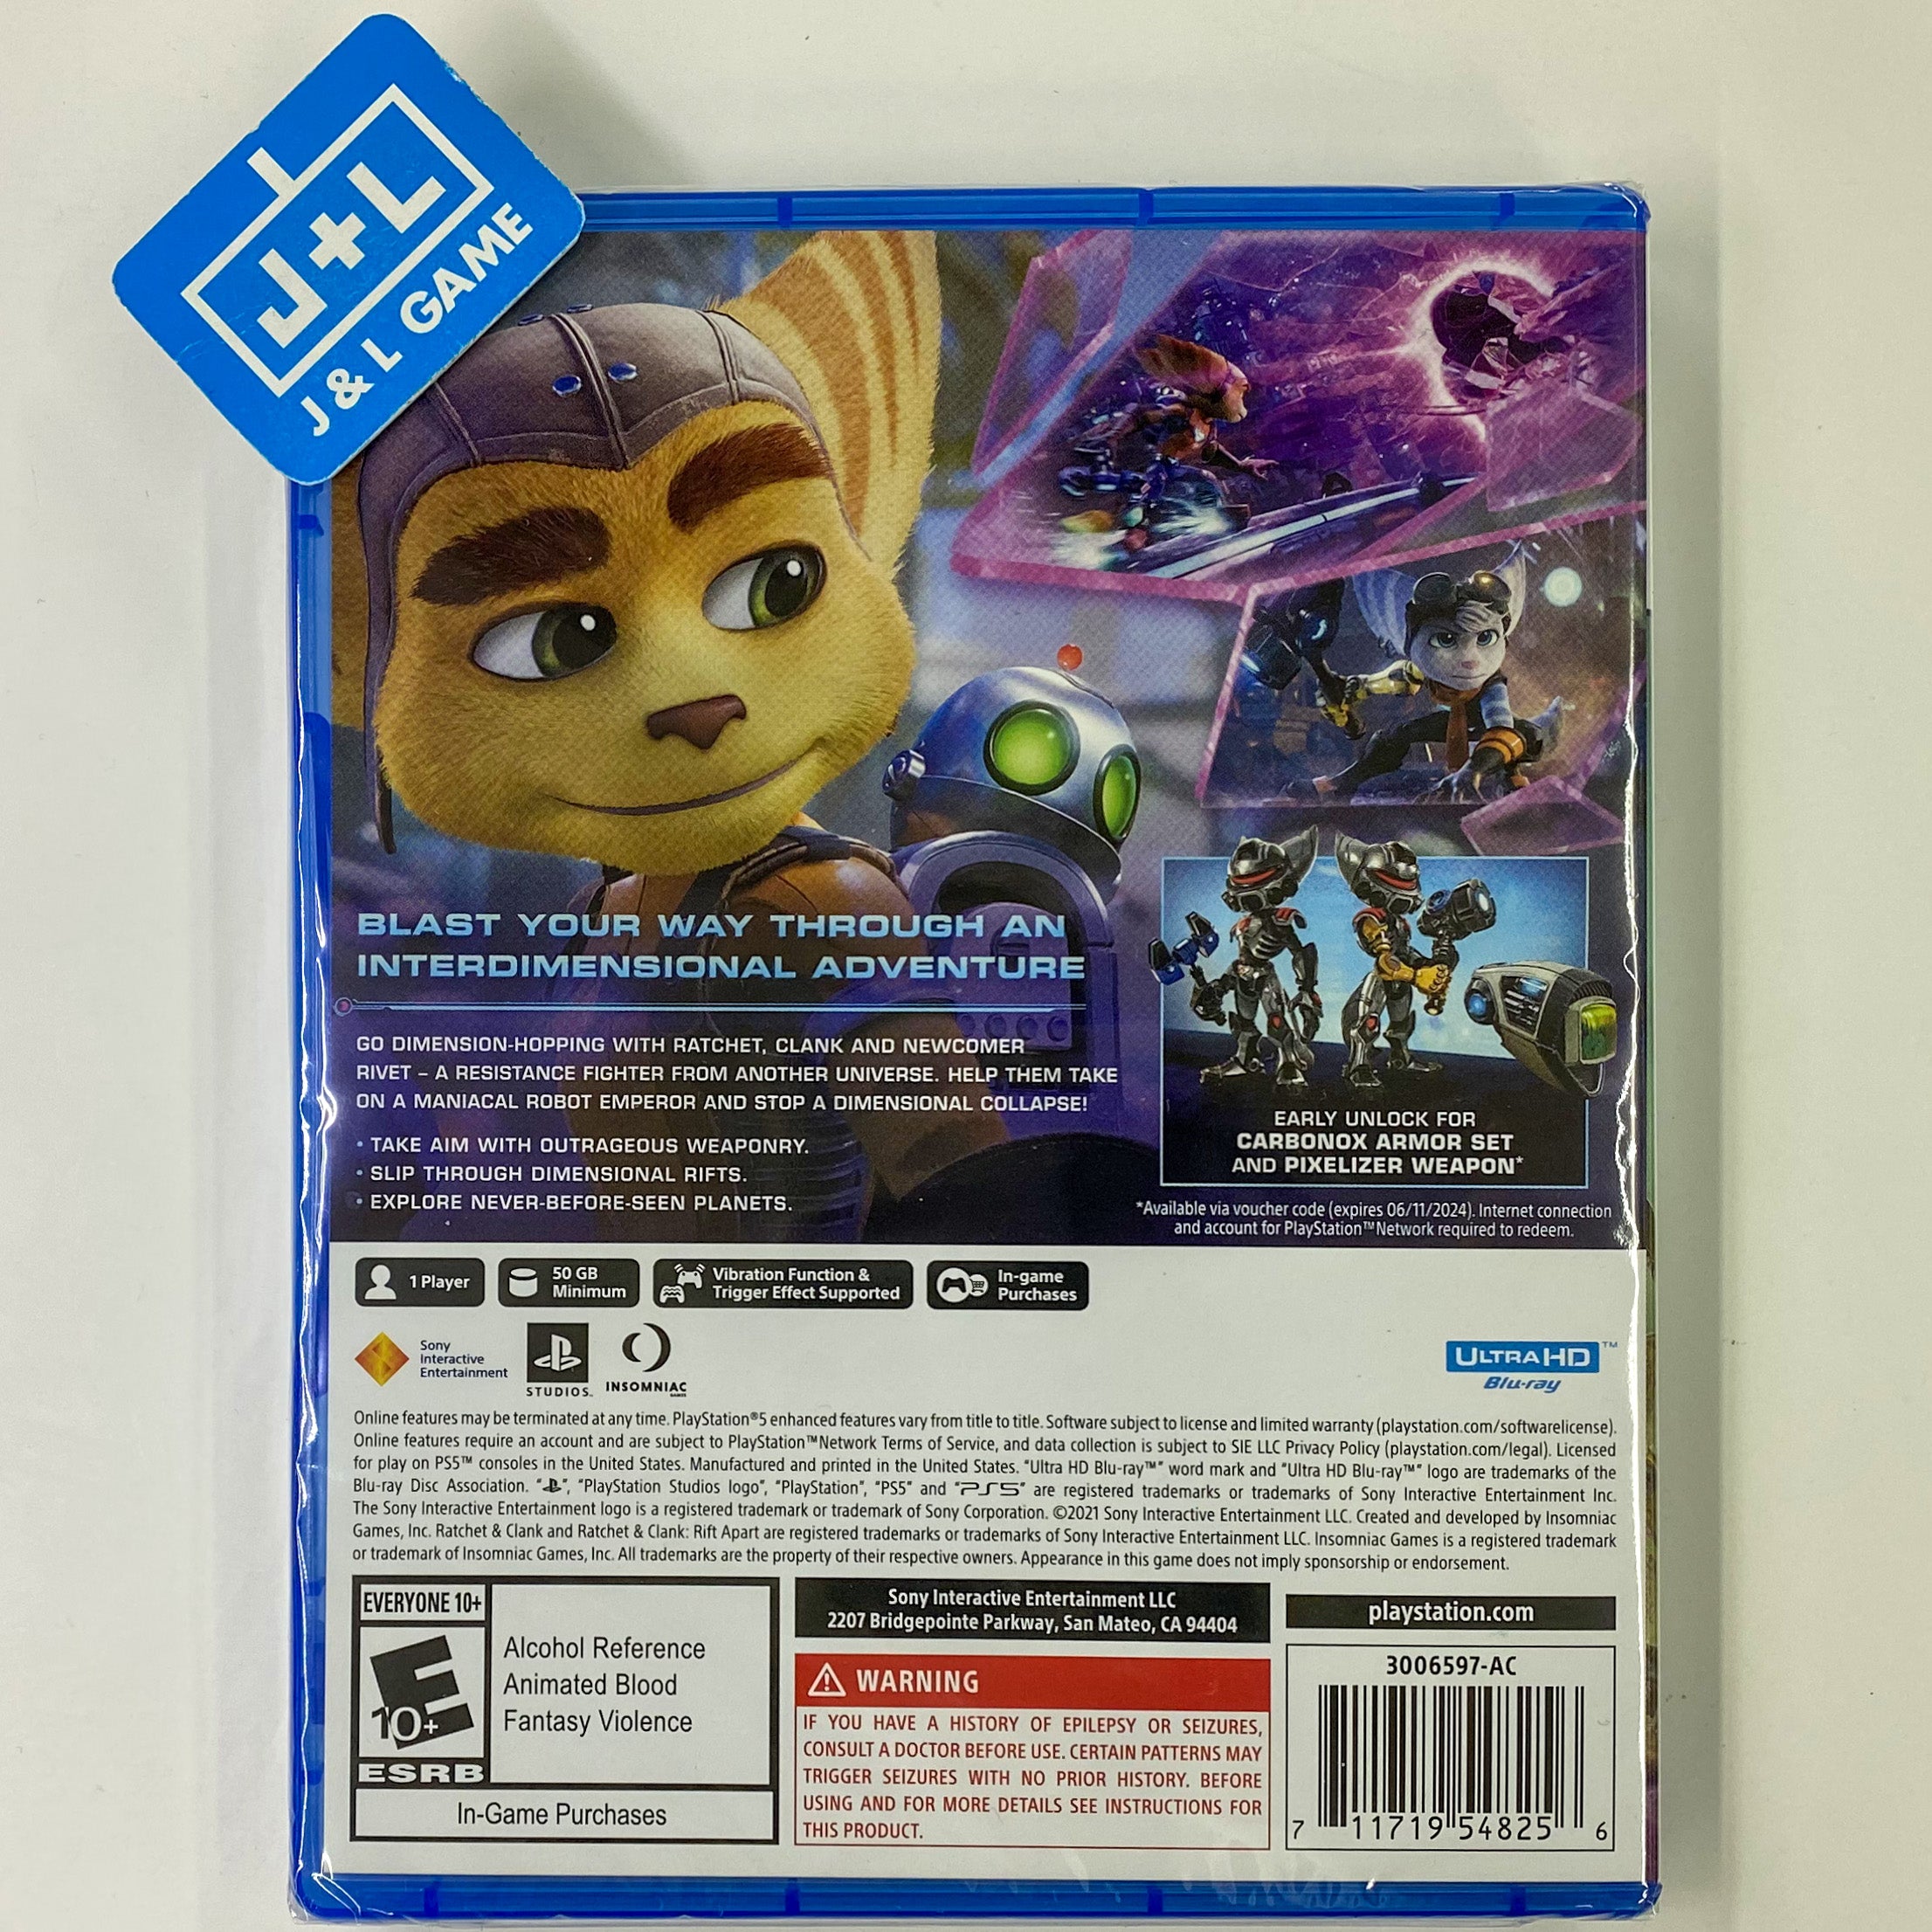 Ratchet & Clank: Rift Apart Launch Edition - (PS5) PlayStation 5 Video Games PlayStation   